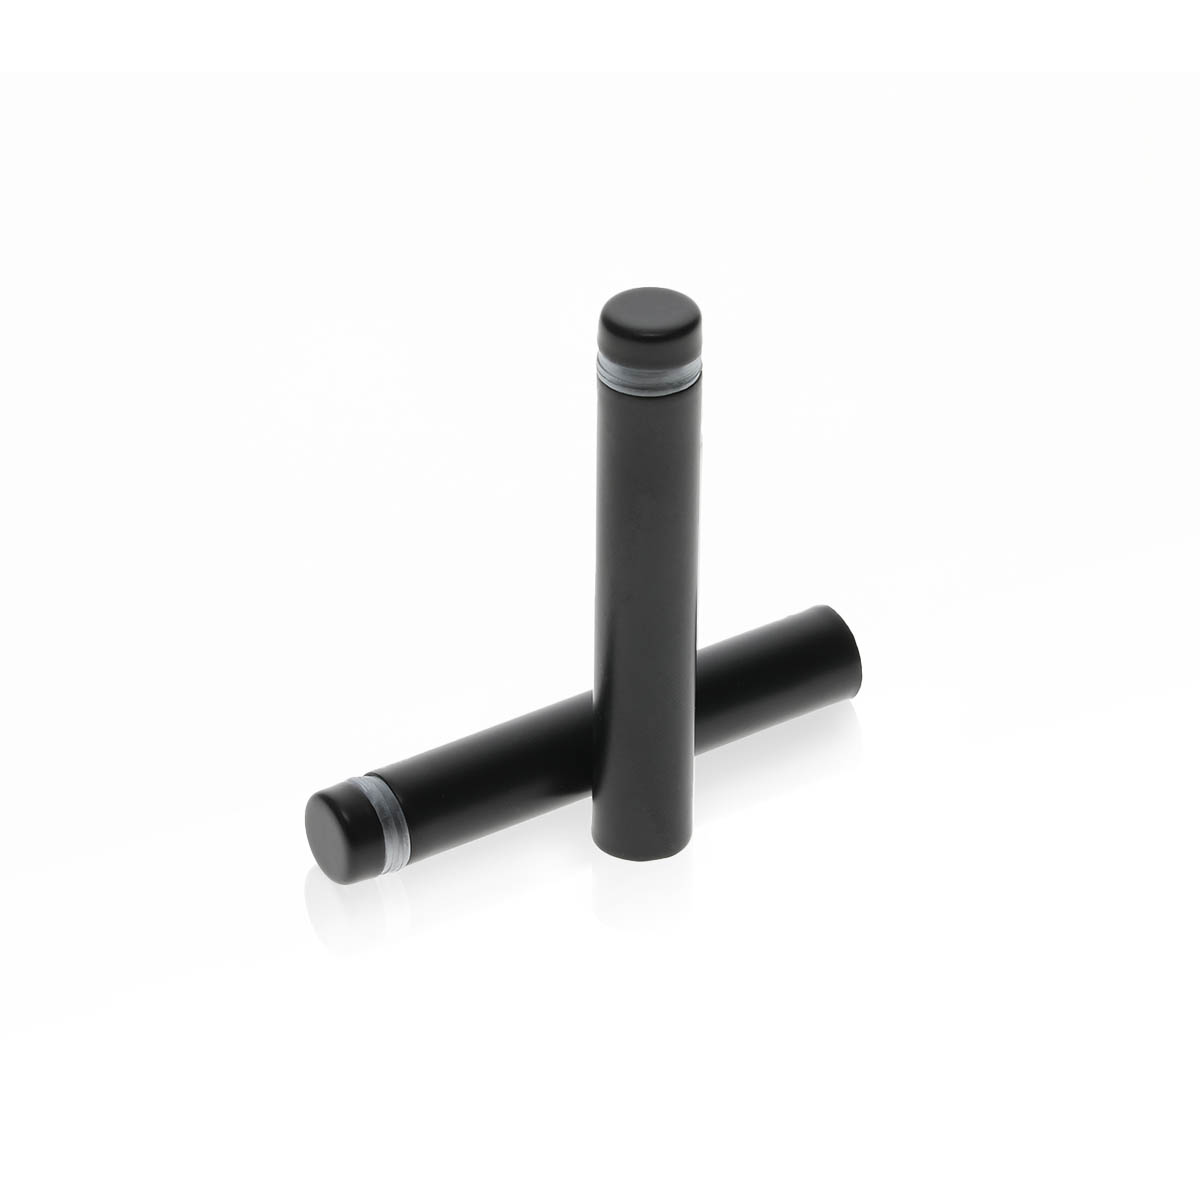 1/2'' Diameter X 2-1/2'' Barrel Length, Hollow Stainless Steel Matte Black Finish. Easy Fasten Standoff (For Inside Use Only) [Required Material Hole Size: 3/8'']